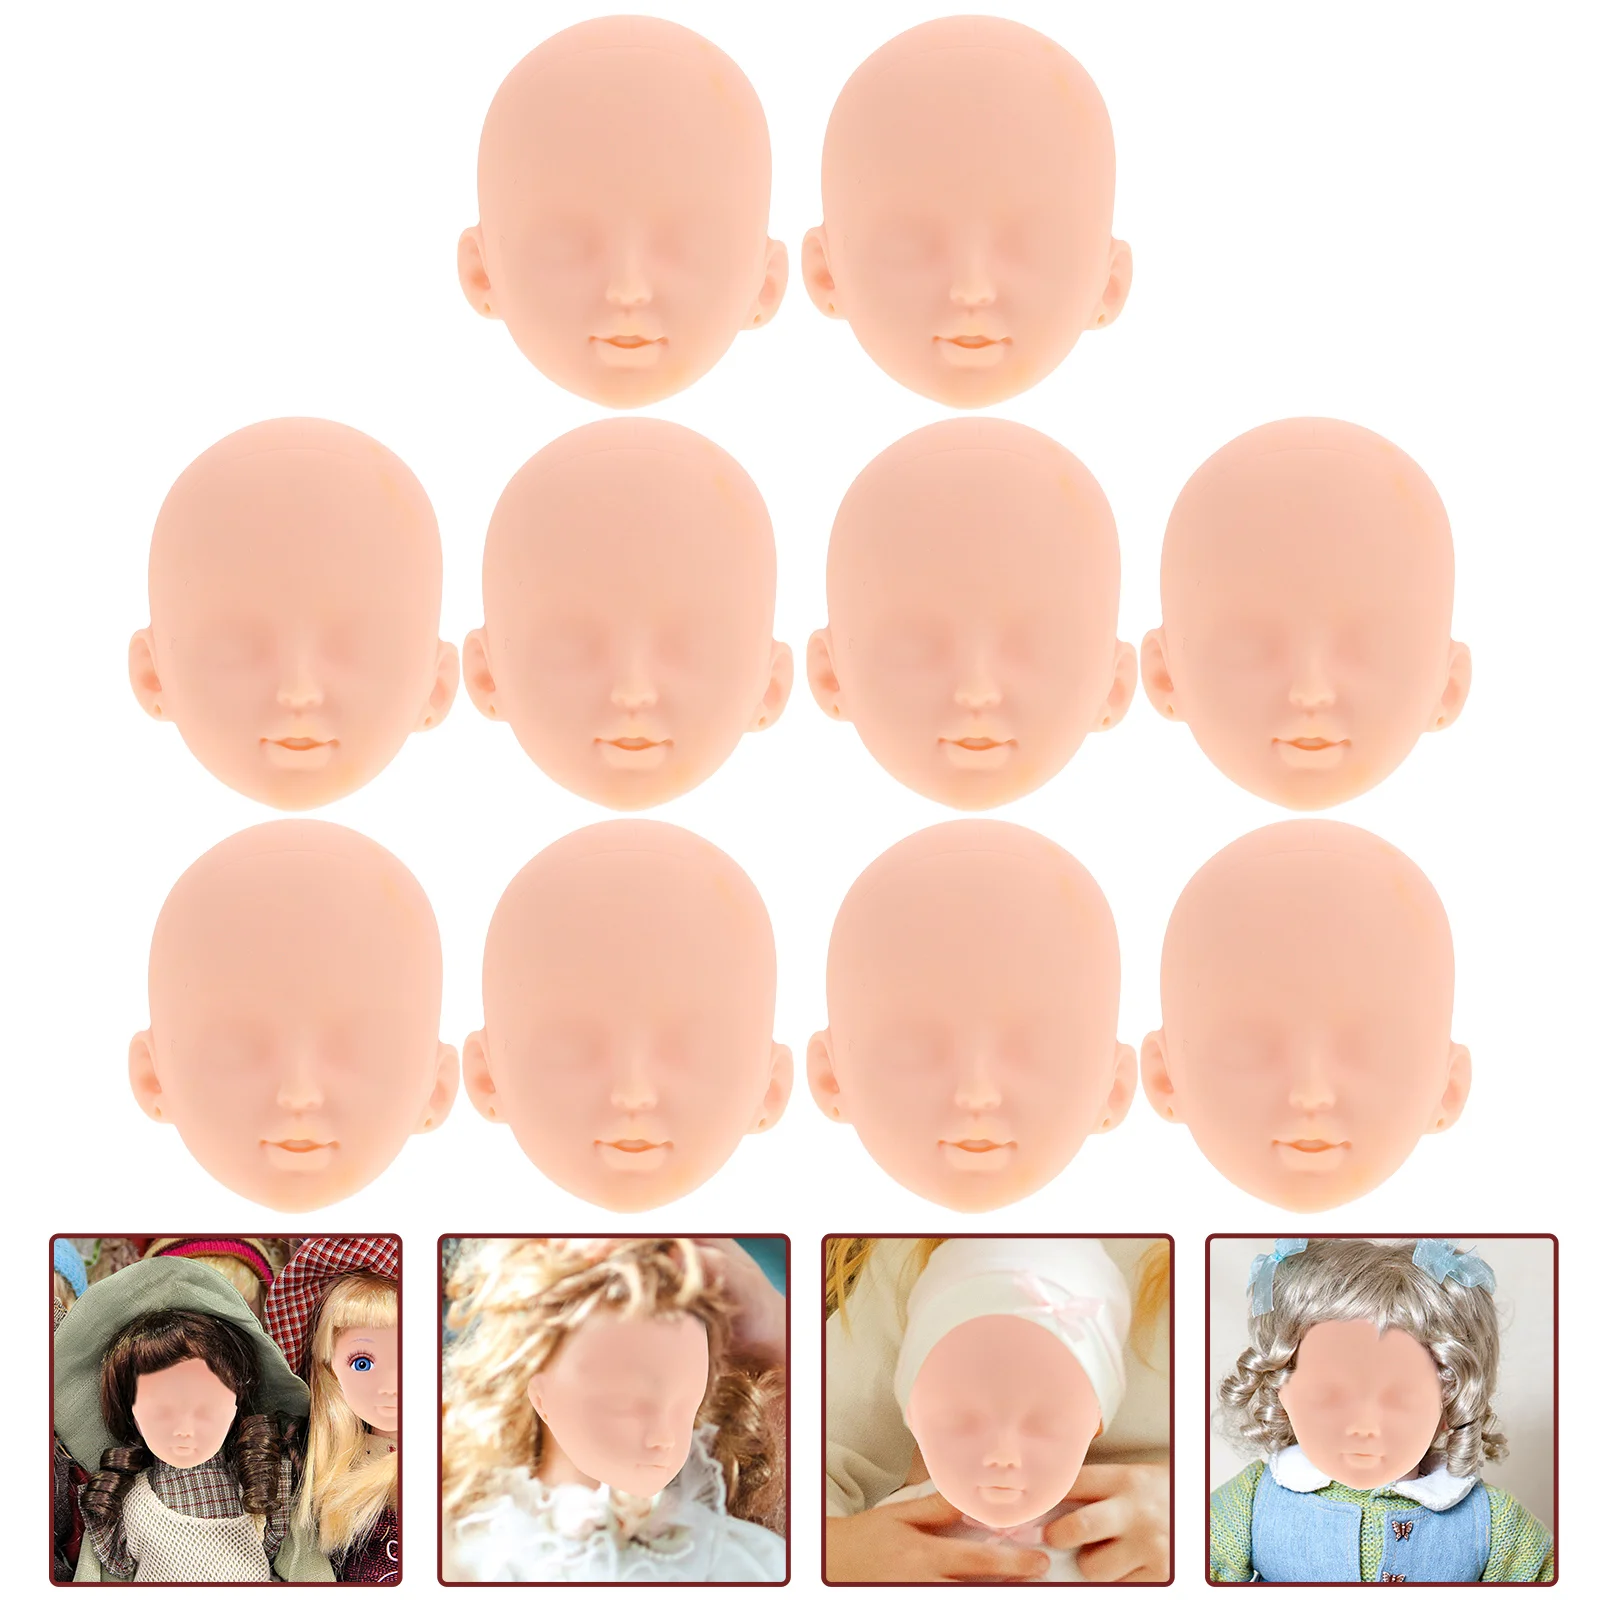 

Dress up Head Tiny Heads Toy Accessories for Kids Replacing Crafts Baby Practical Children's Toys